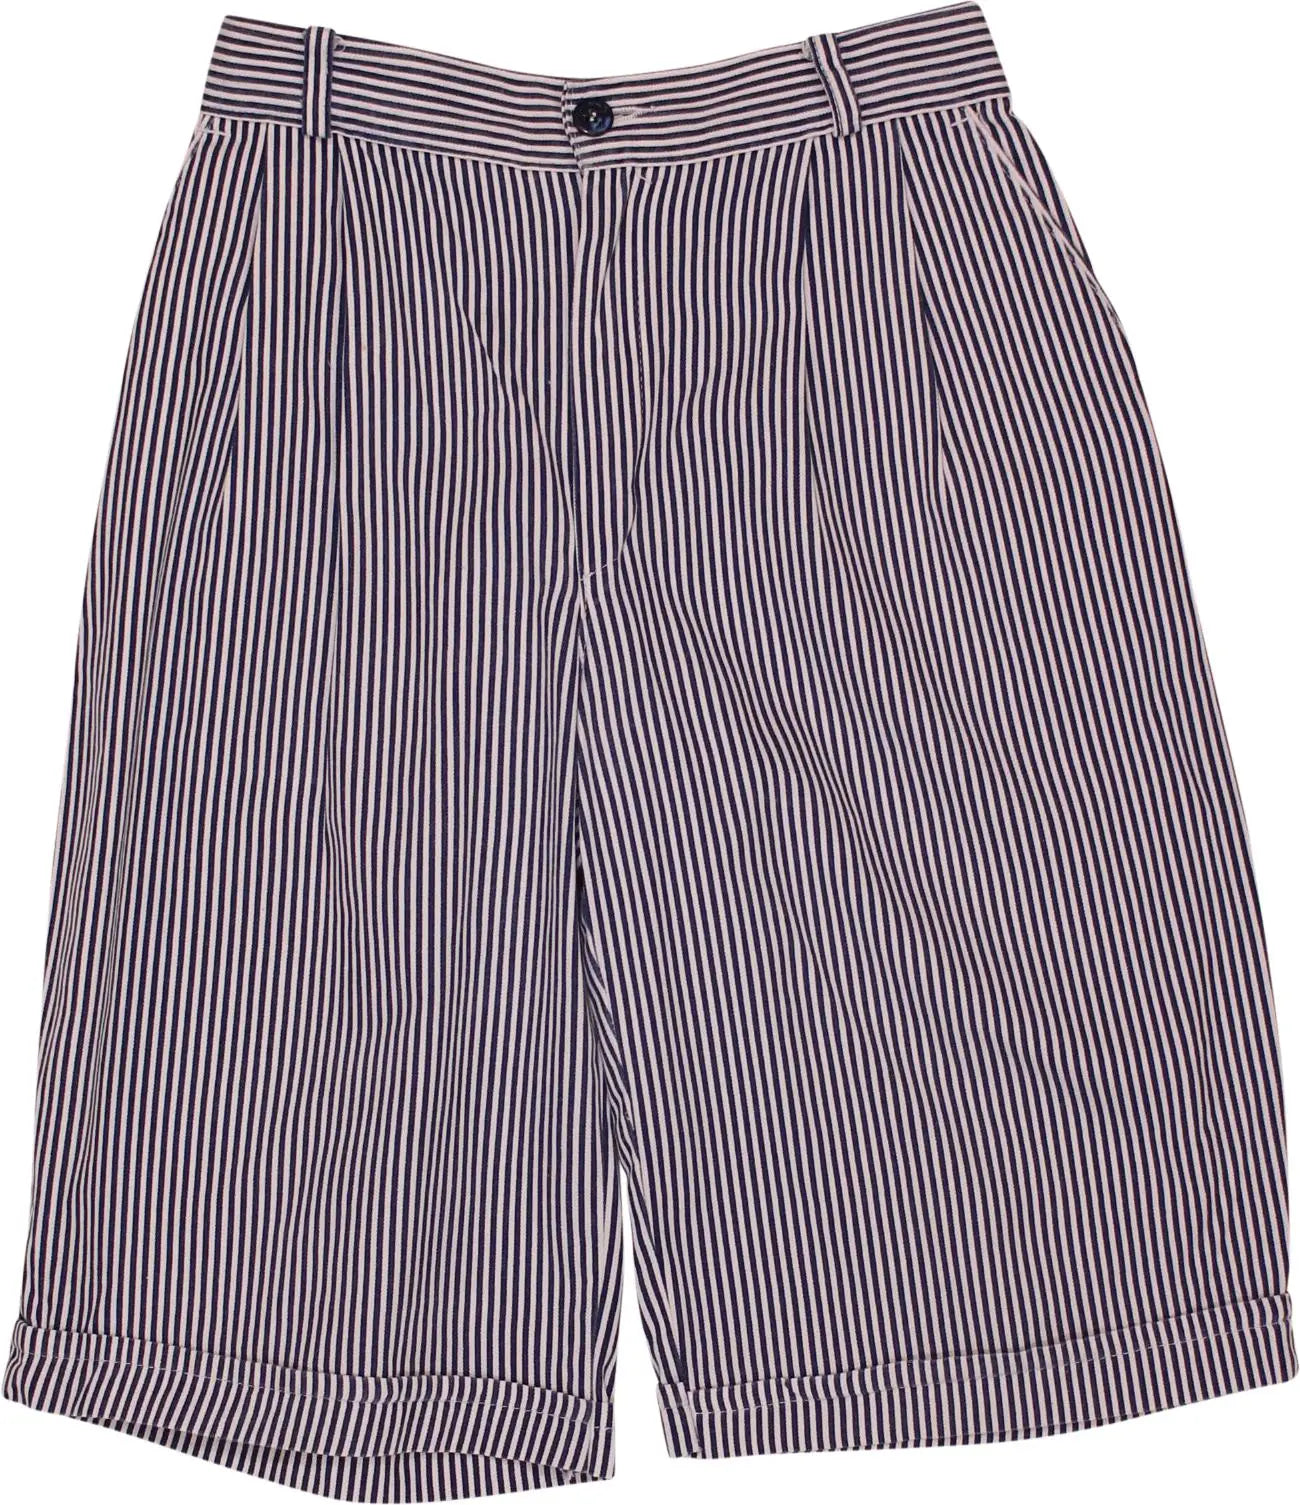 Unknown - Vintage Striped Shorts- ThriftTale.com - Vintage and second handclothing